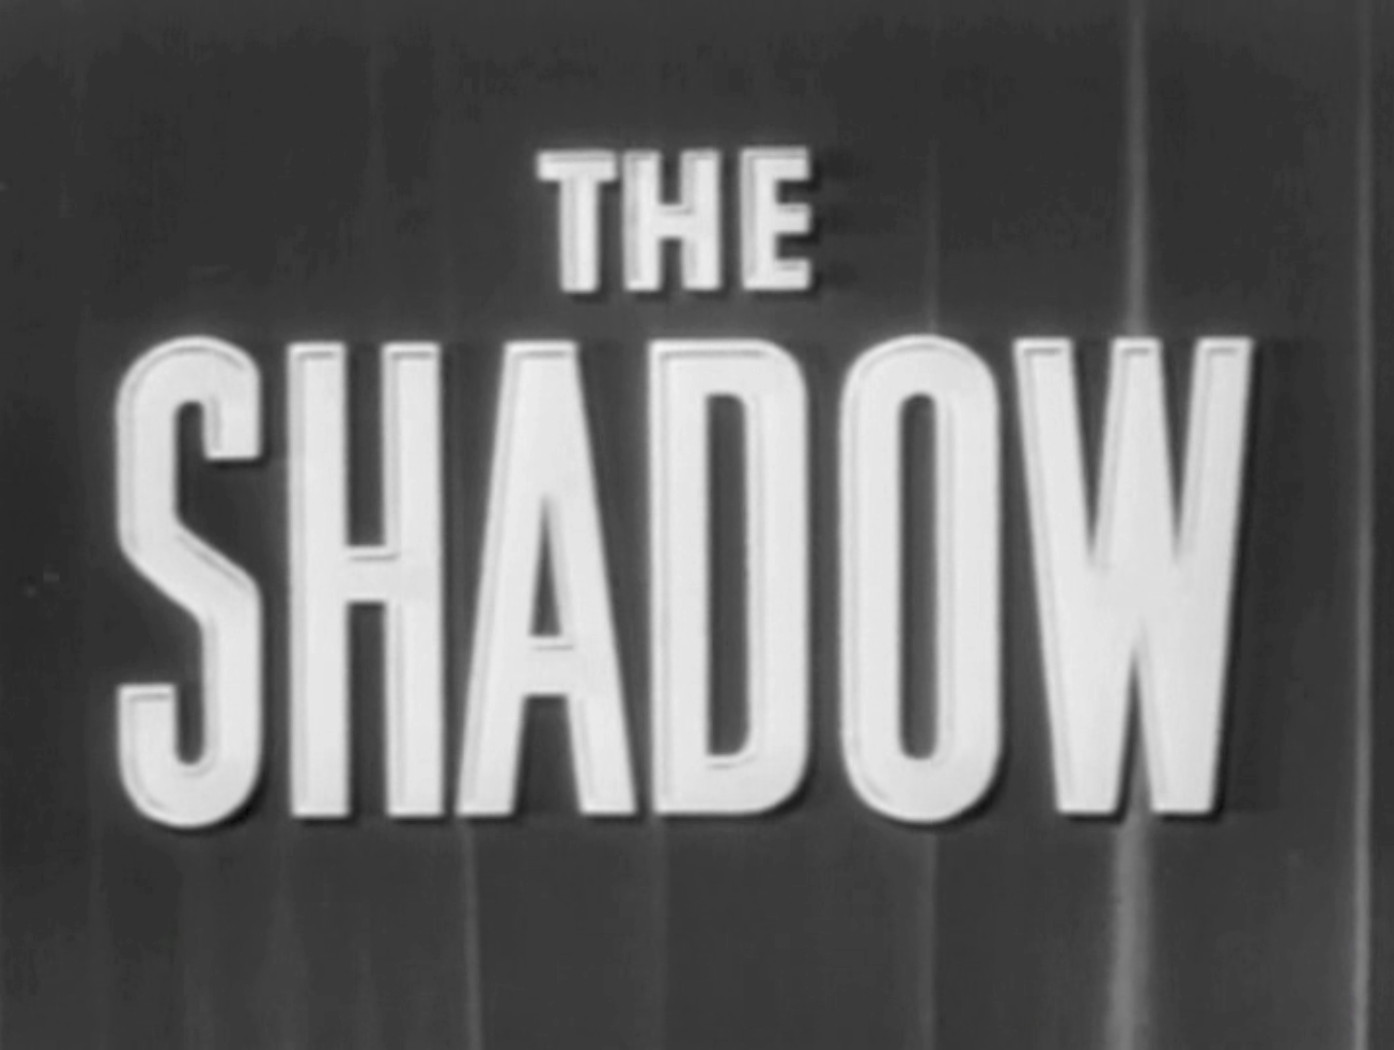 The first attempt to bring The Shadow to television.